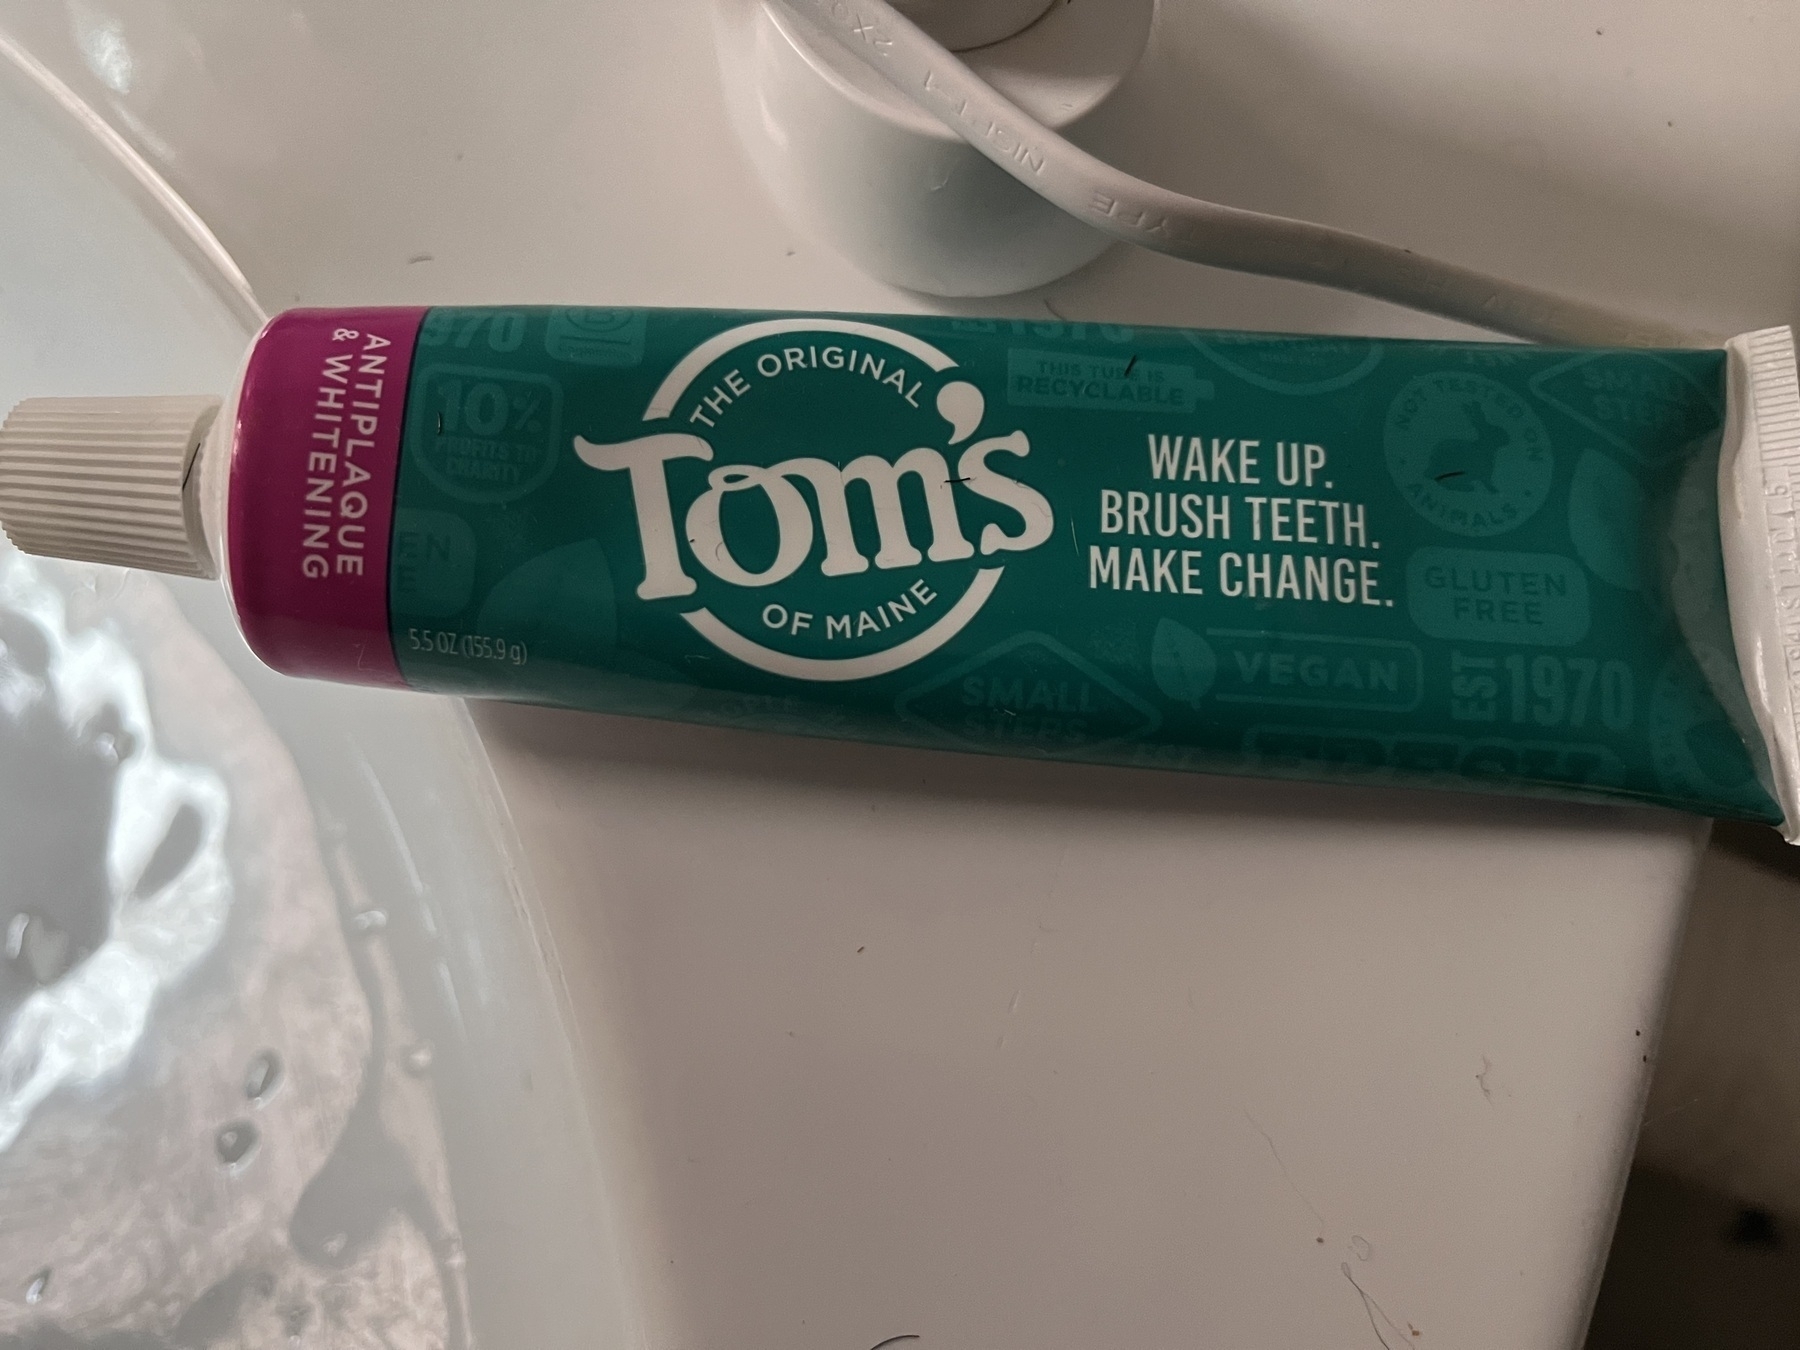 Toms of main brand toothpaste. Their printed motto is “wake up. Brush teeth. Make change. “